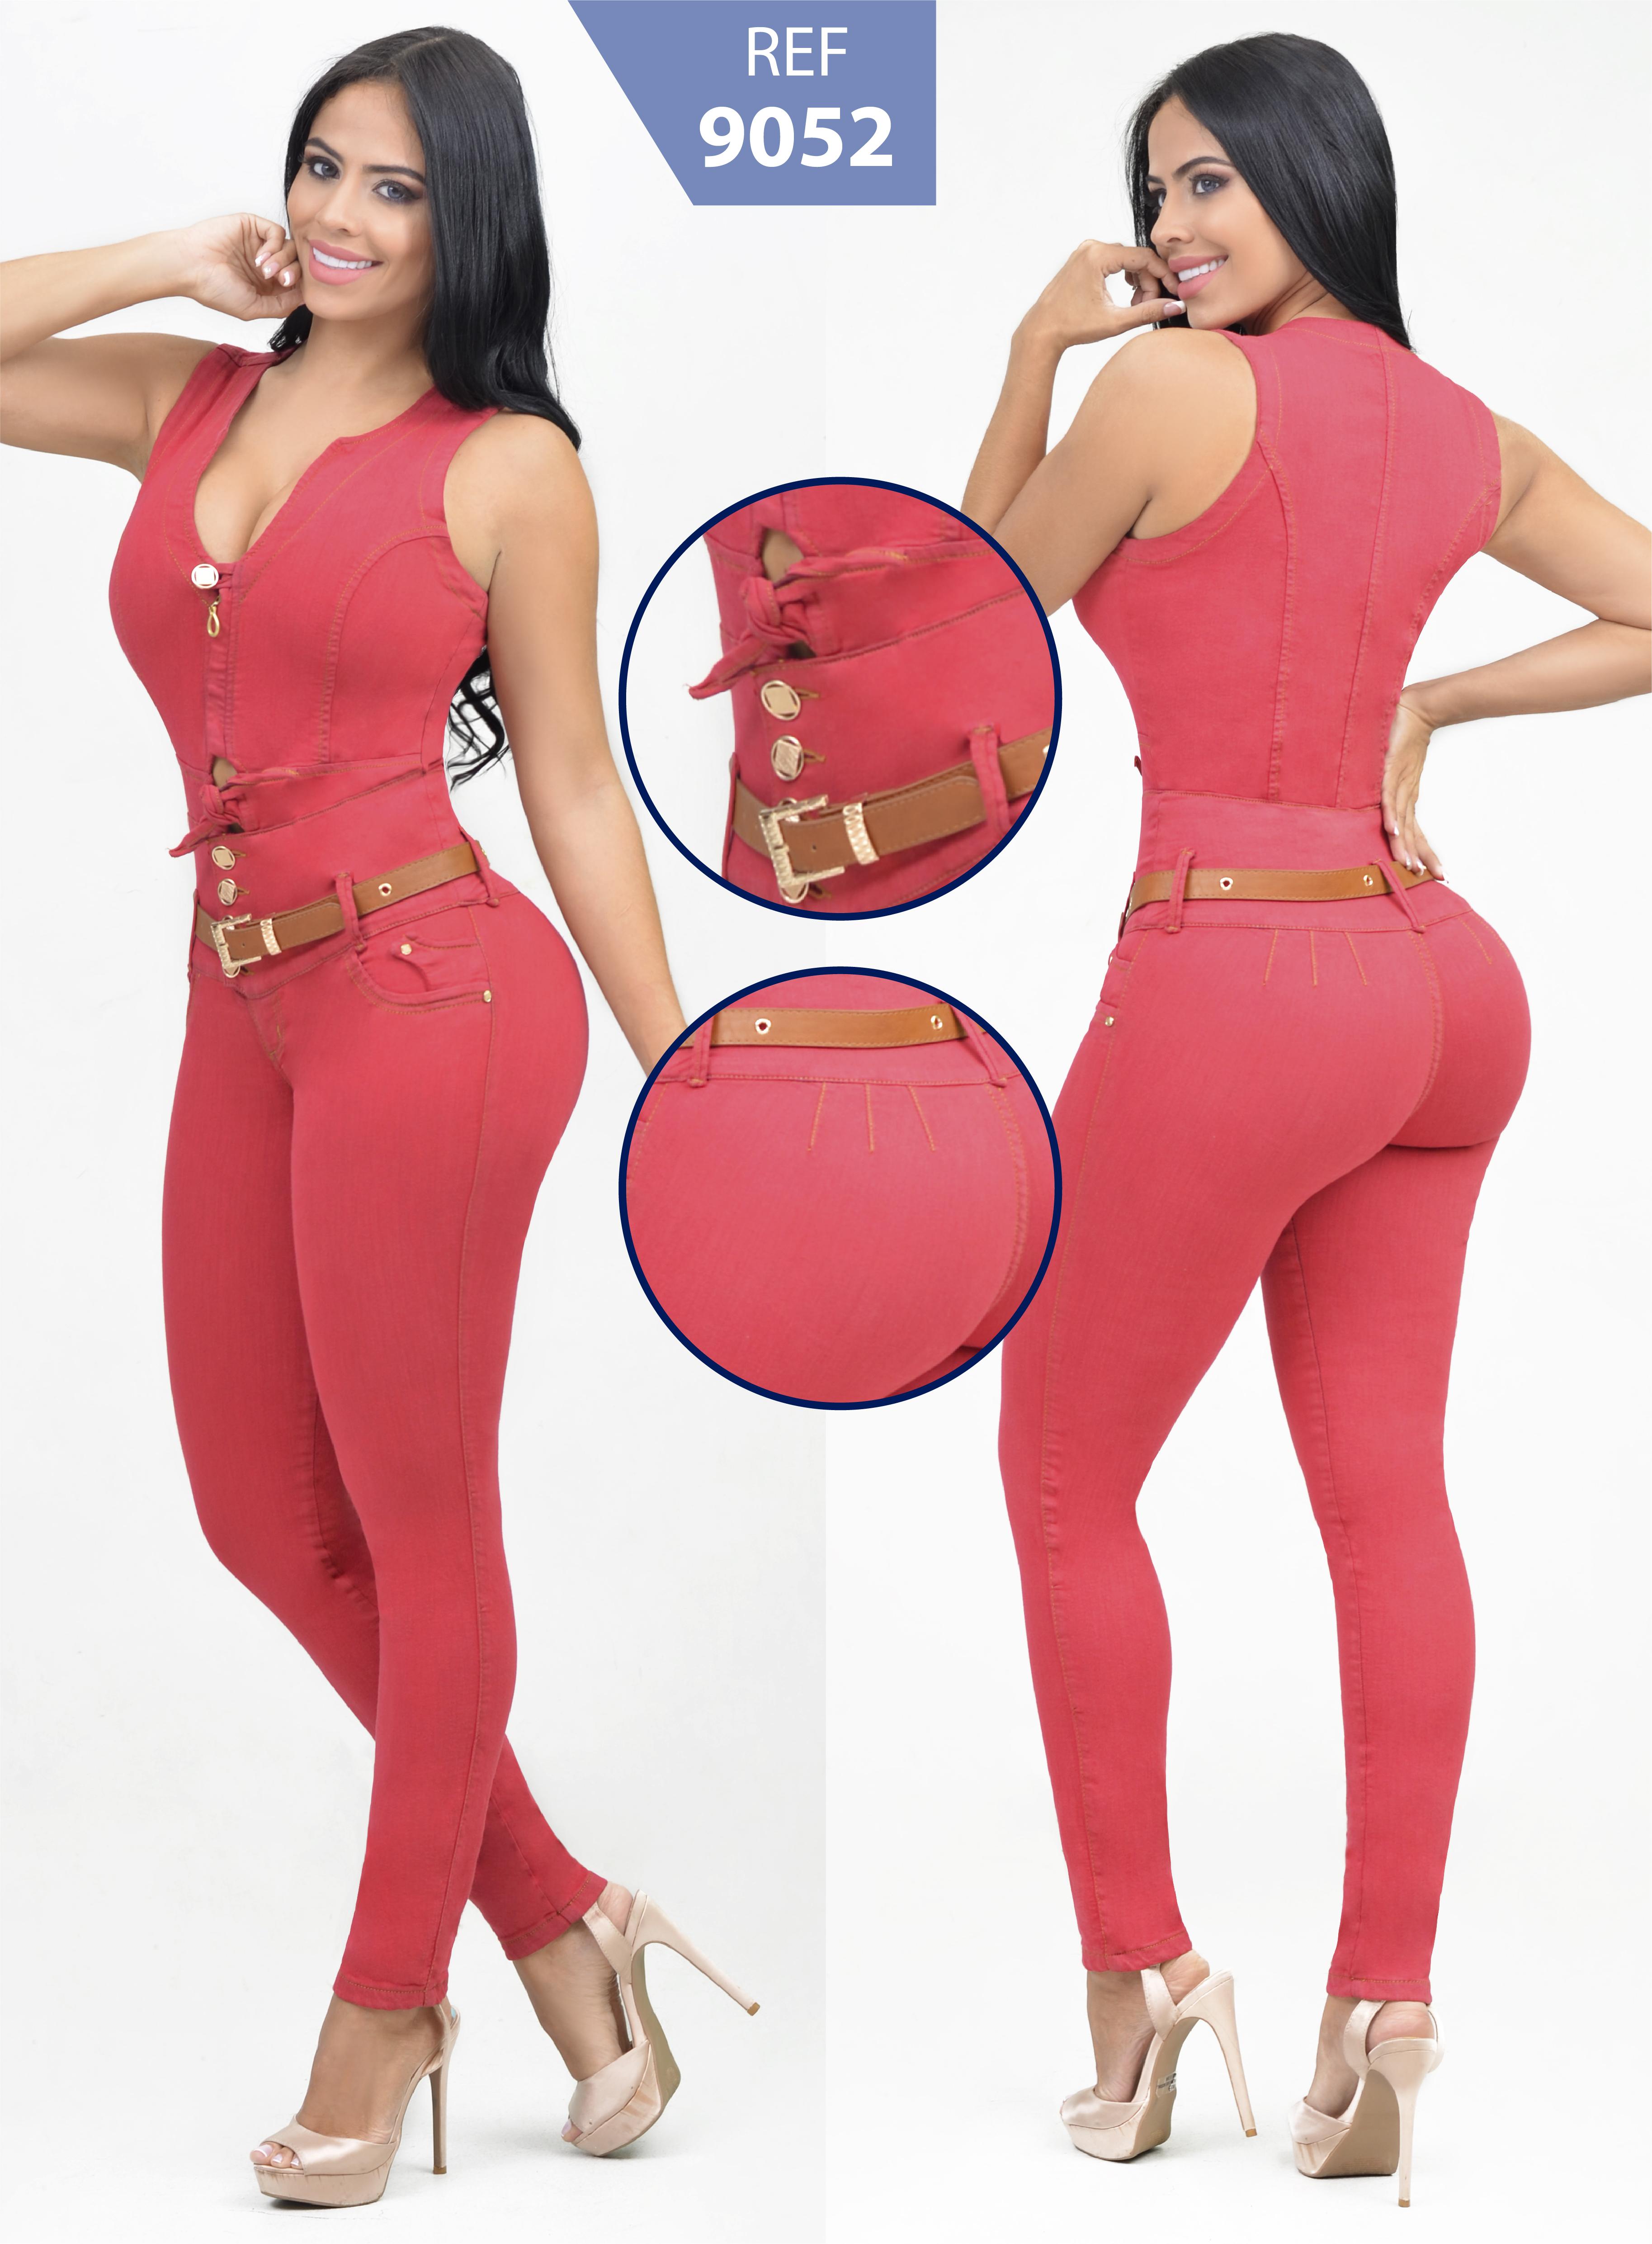 From Colombia Mono In Jean with Cleavage and arms discovered in cherry color